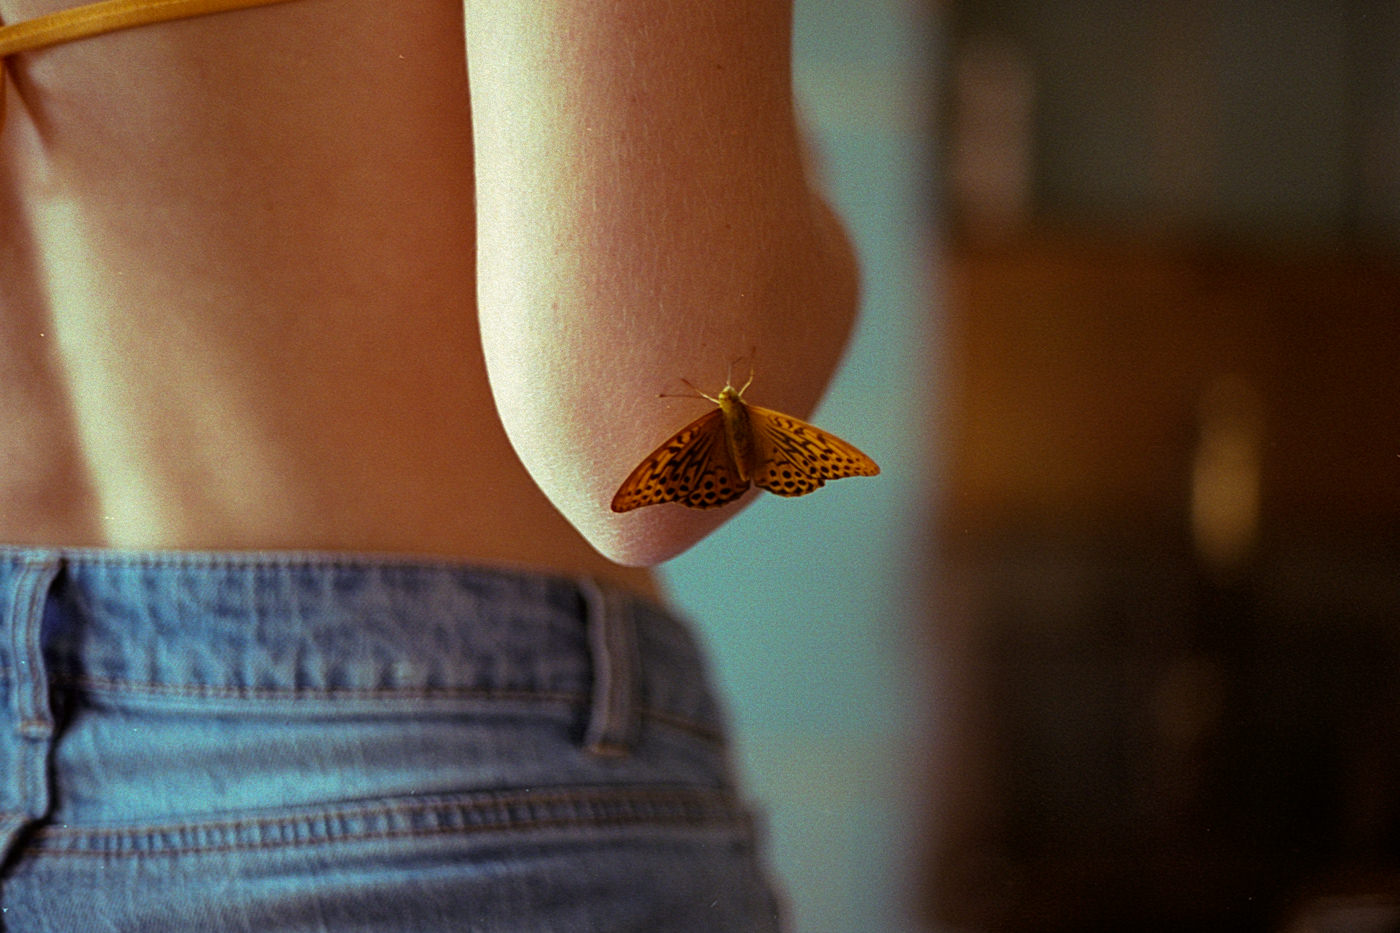 An orange butterfly landed on the soft skin